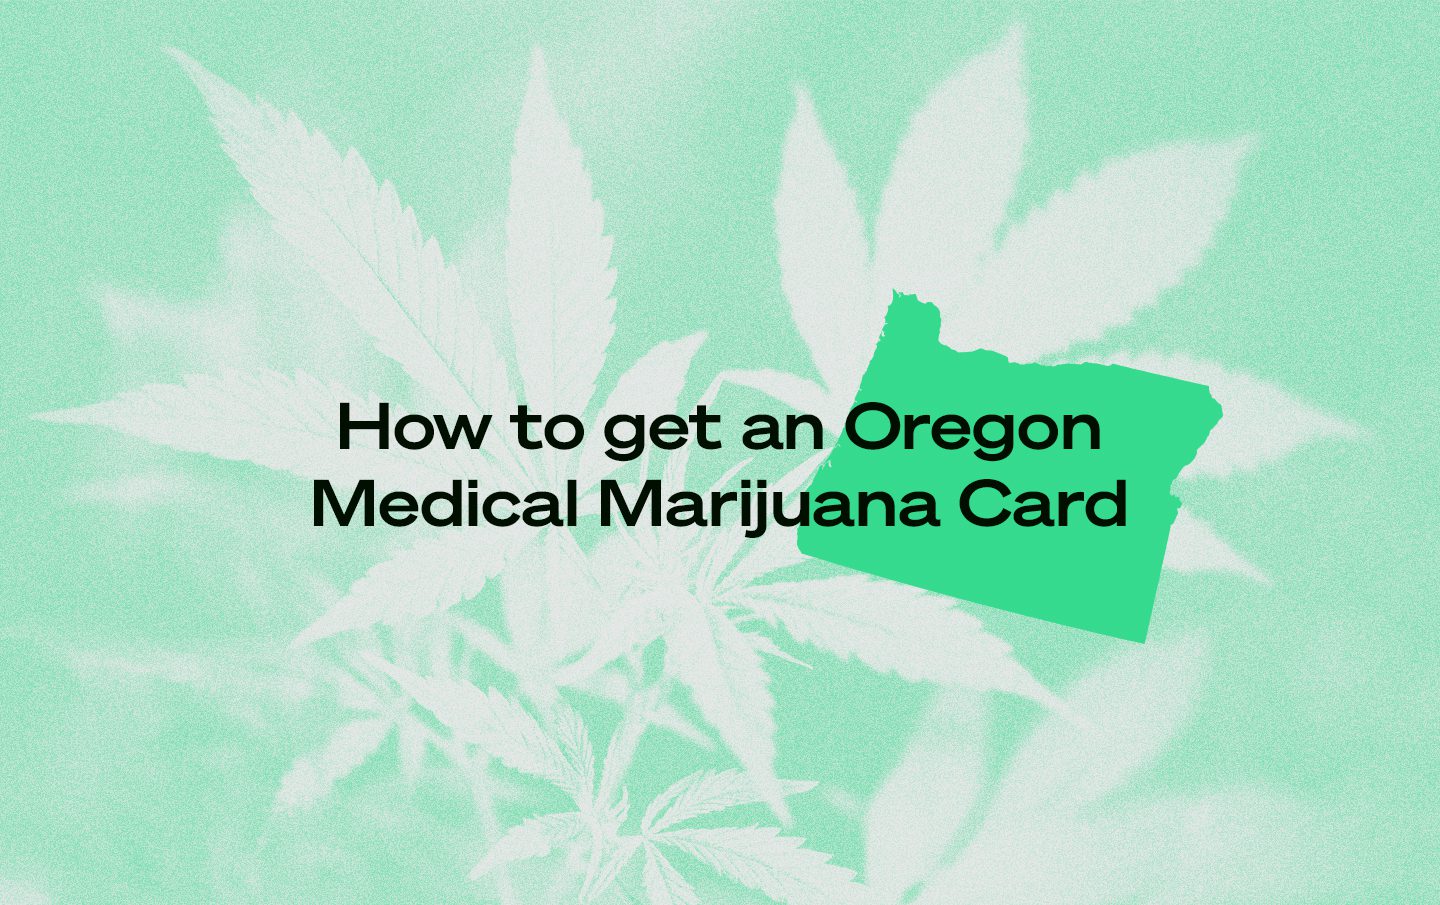 How to get a medical marijuana card and get certified for medicinal cannabis in Oregon